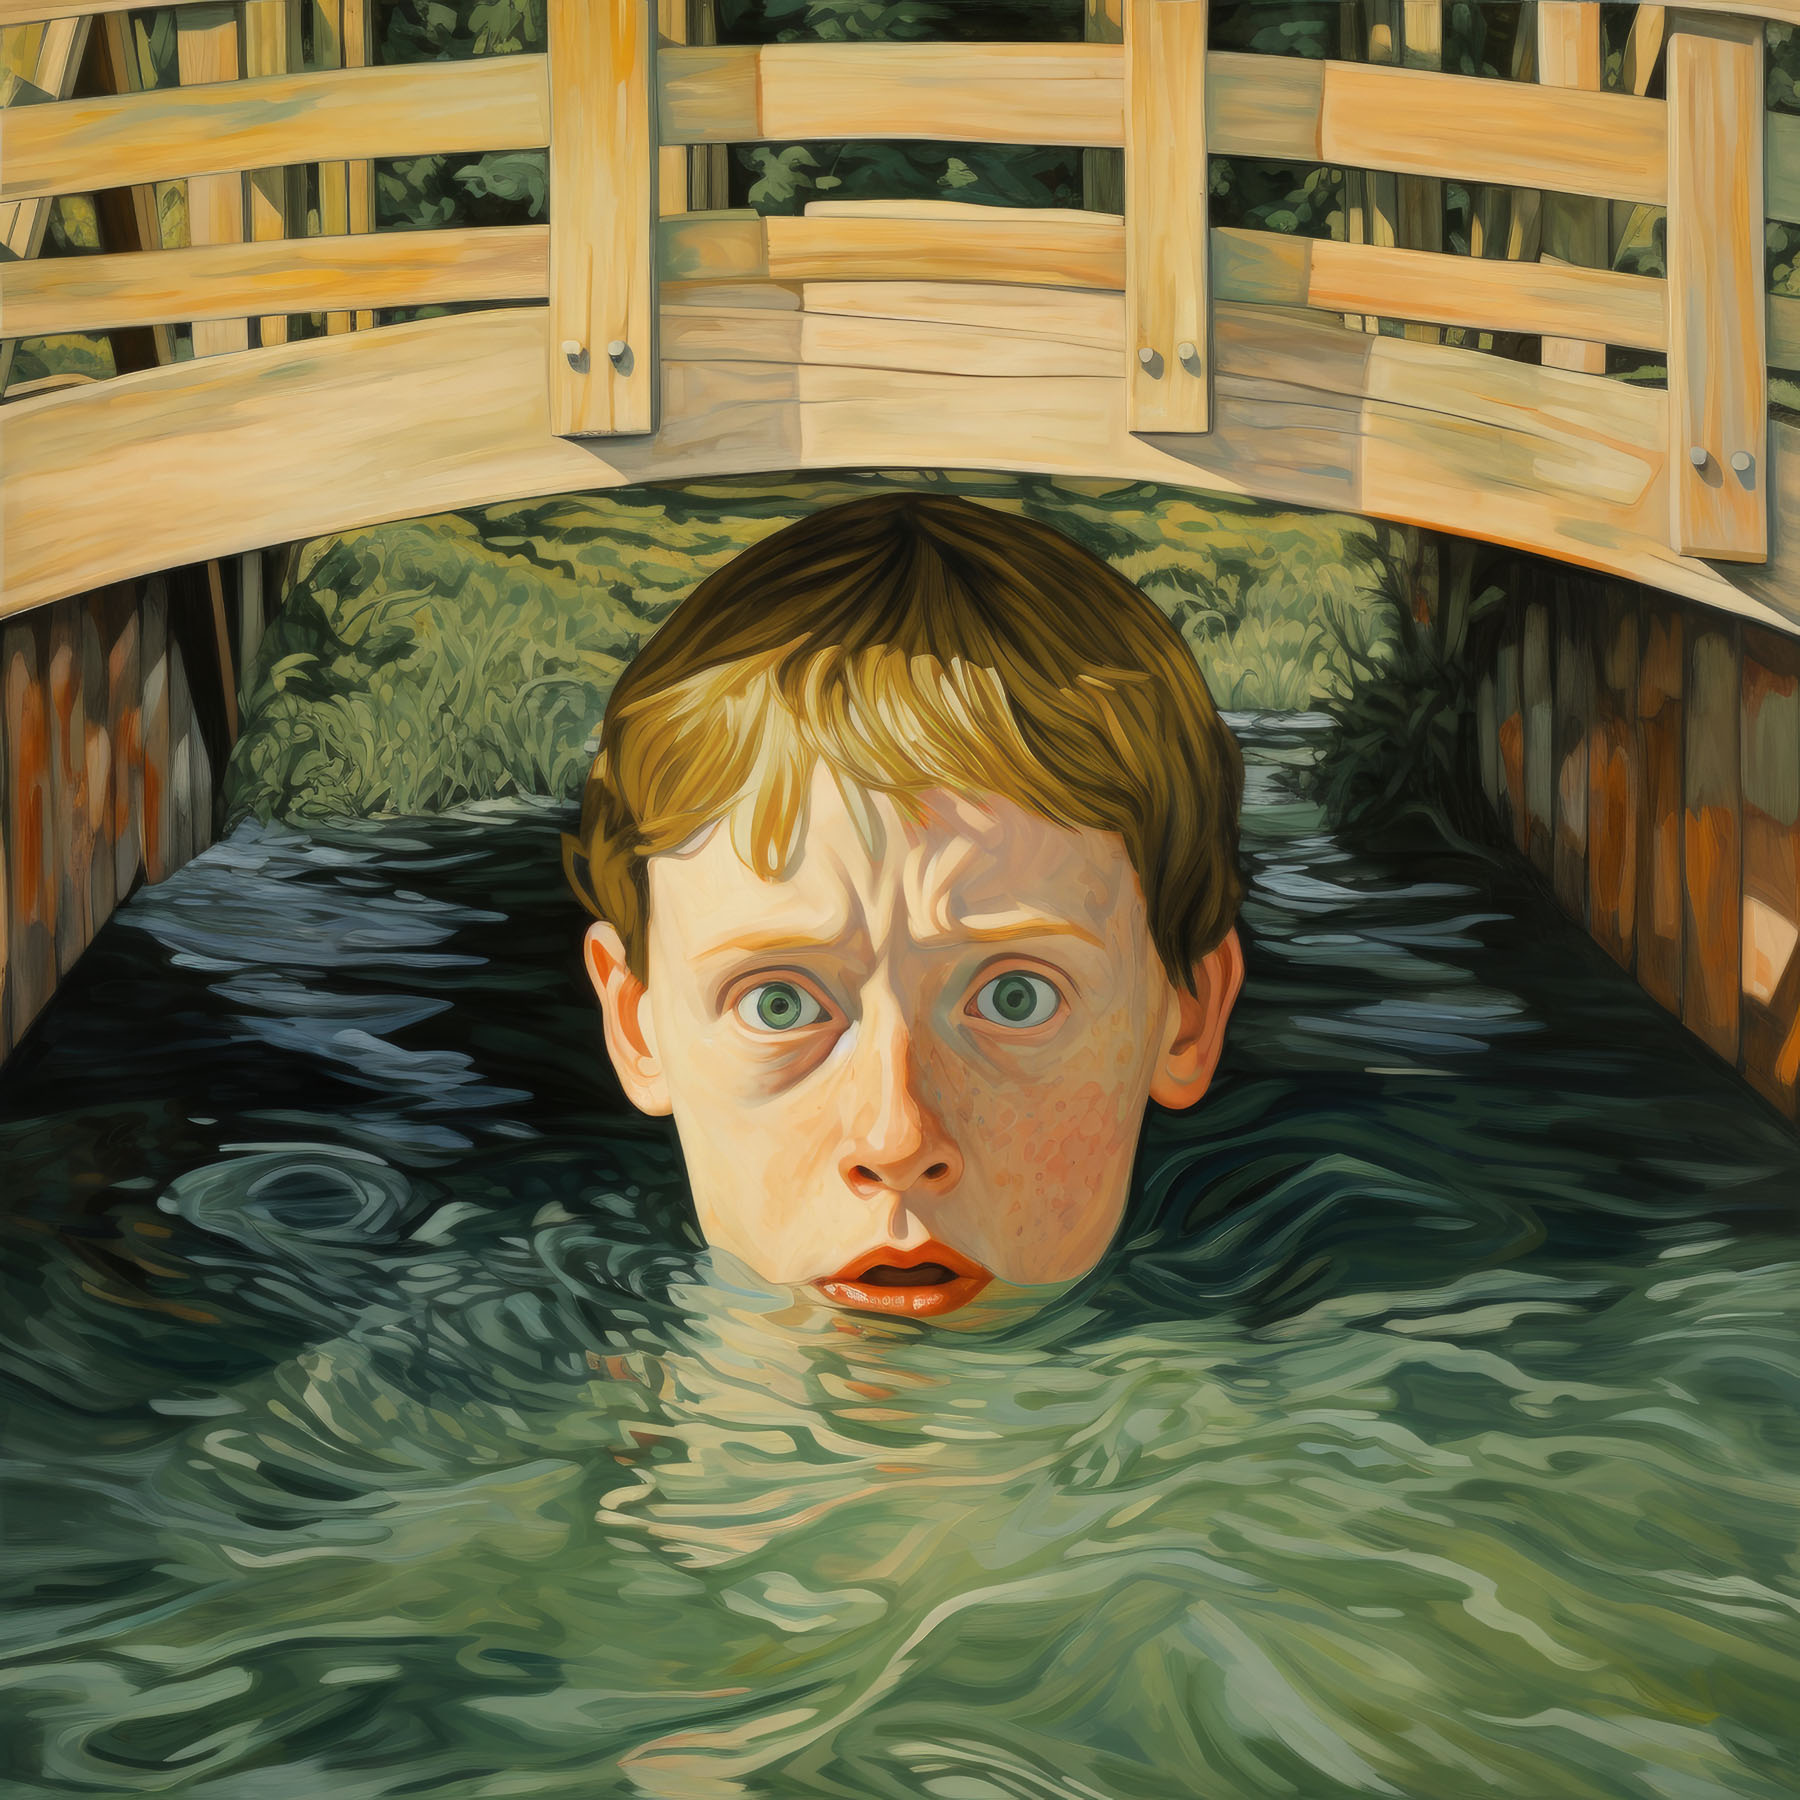 Red haired boy looks scared submerged in water under a bridge.